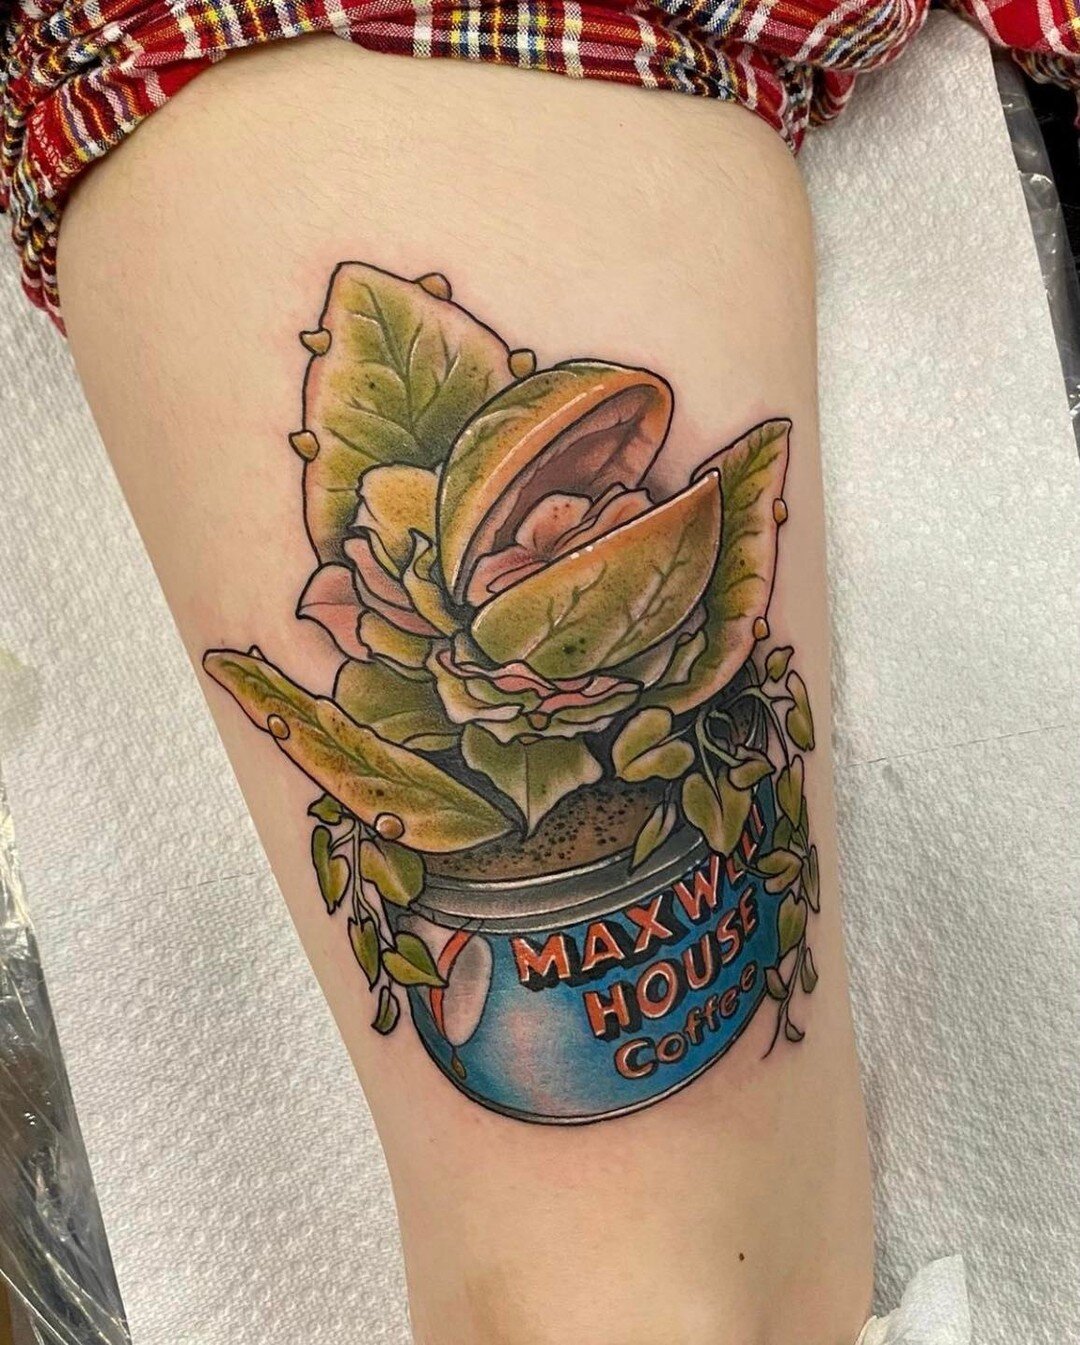 Little Shop of Horrors Tattoo any ideas for a companion piece on other  leg Artist Rachel Valentino Tallahassee FL  rlittleshopofhorrors